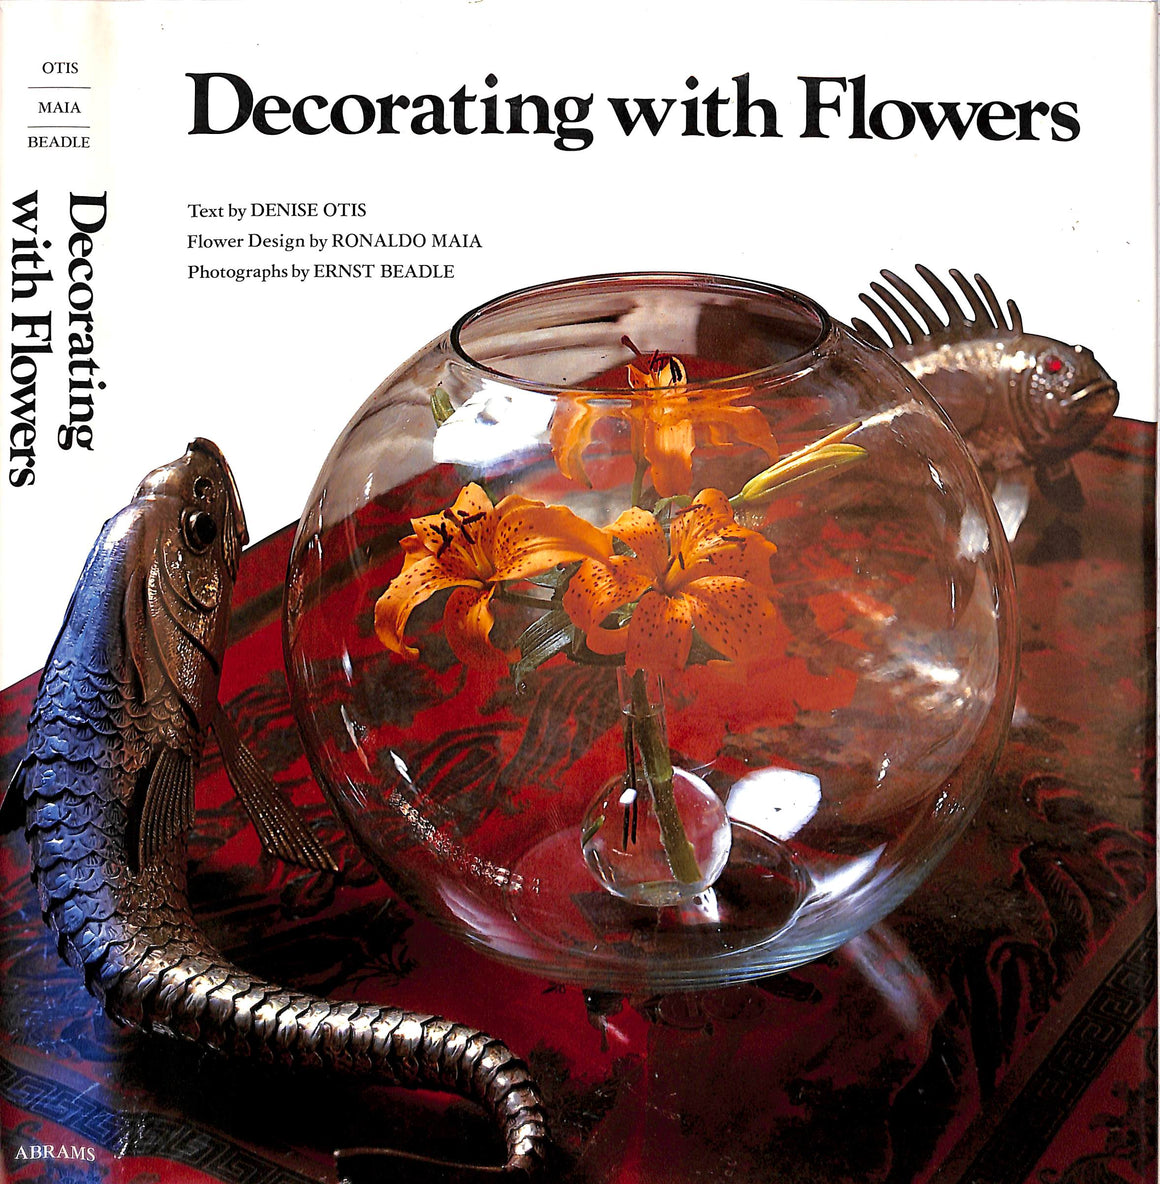 "Decorating With Flowers" 1978 OTIS, Denise [text by]